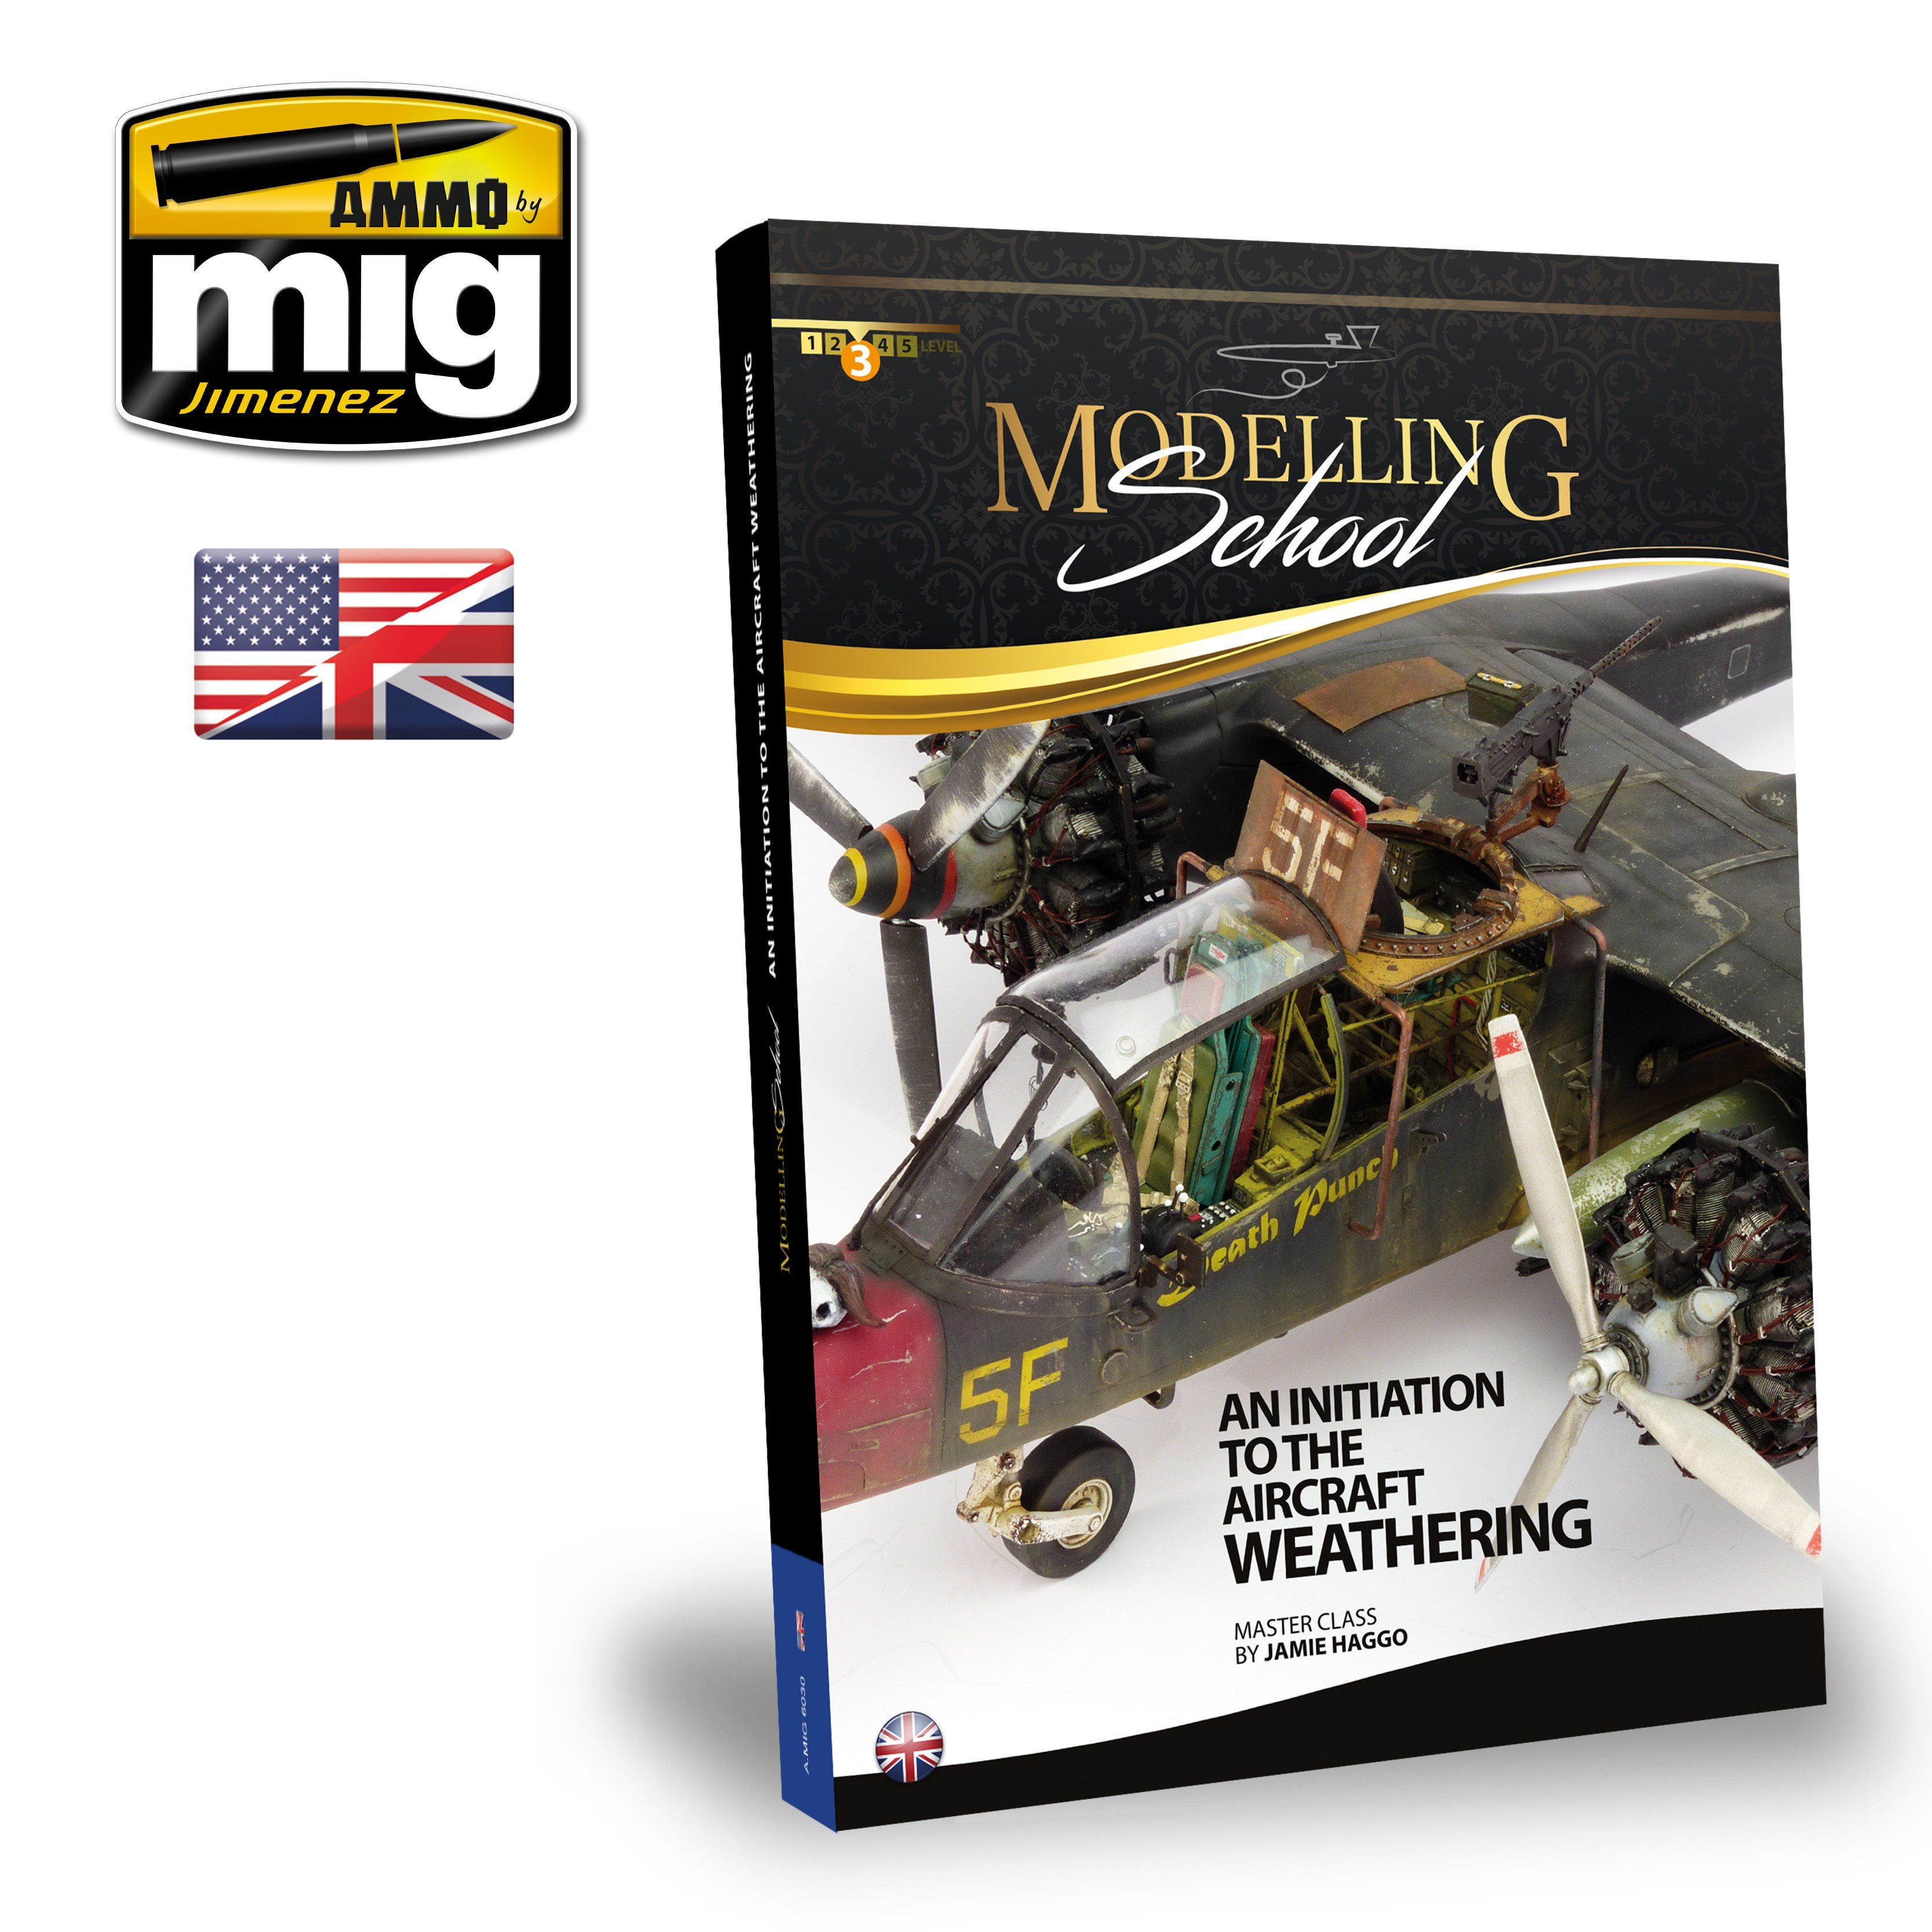 Modelling School – An Initiation to Aircraft Weathering English